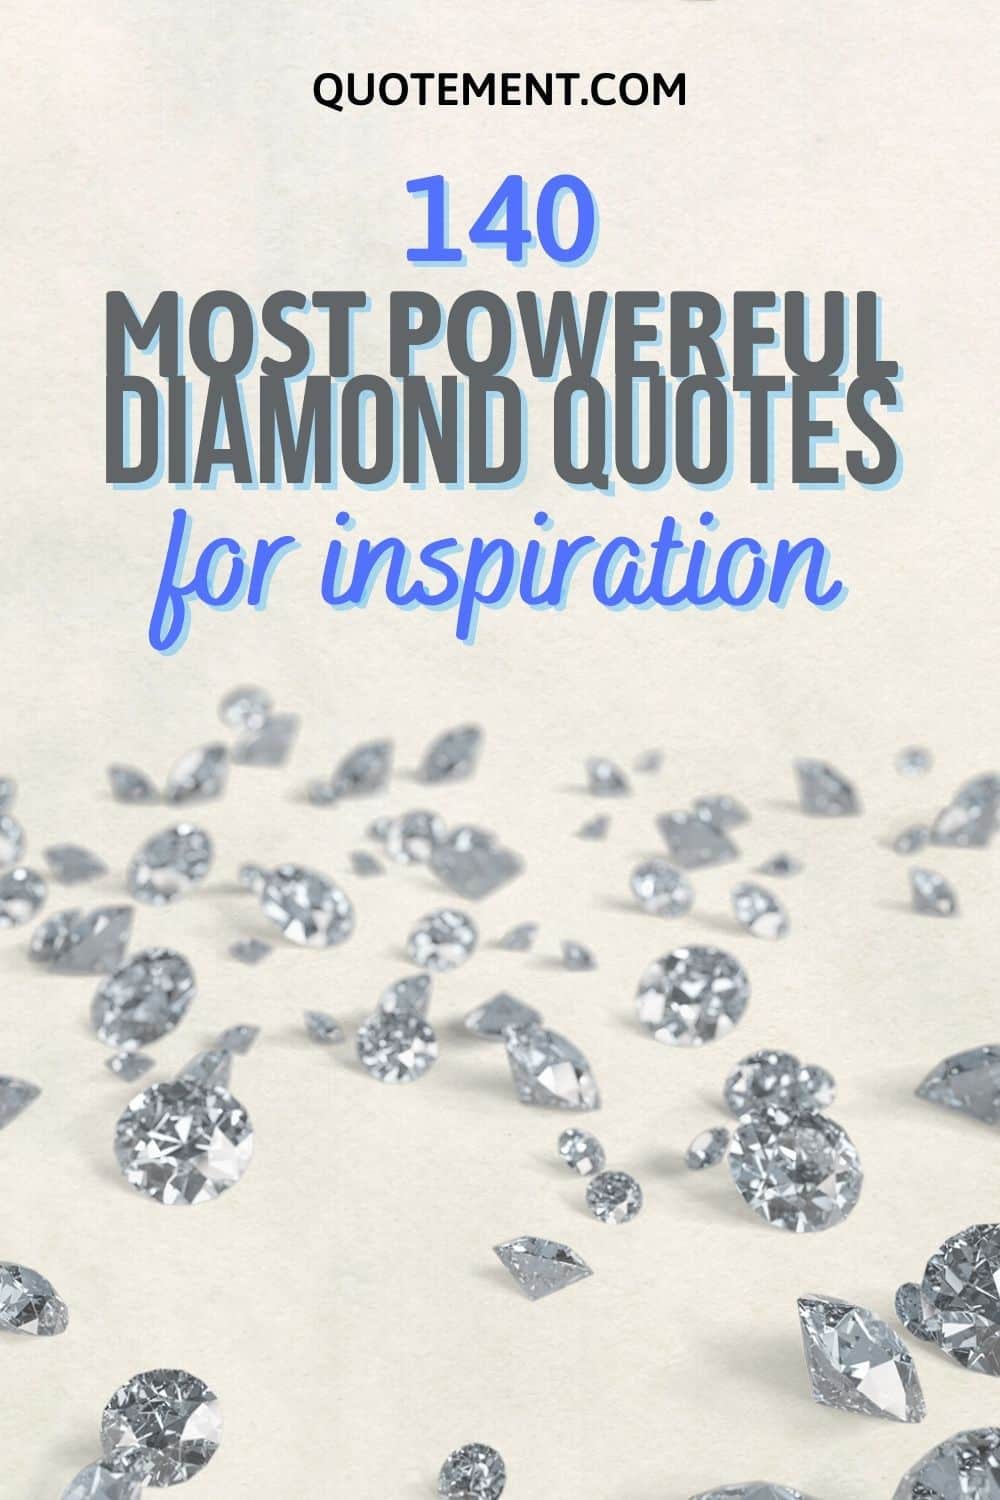 List Of 140 Eye-opening Diamond Quotes To Check Out